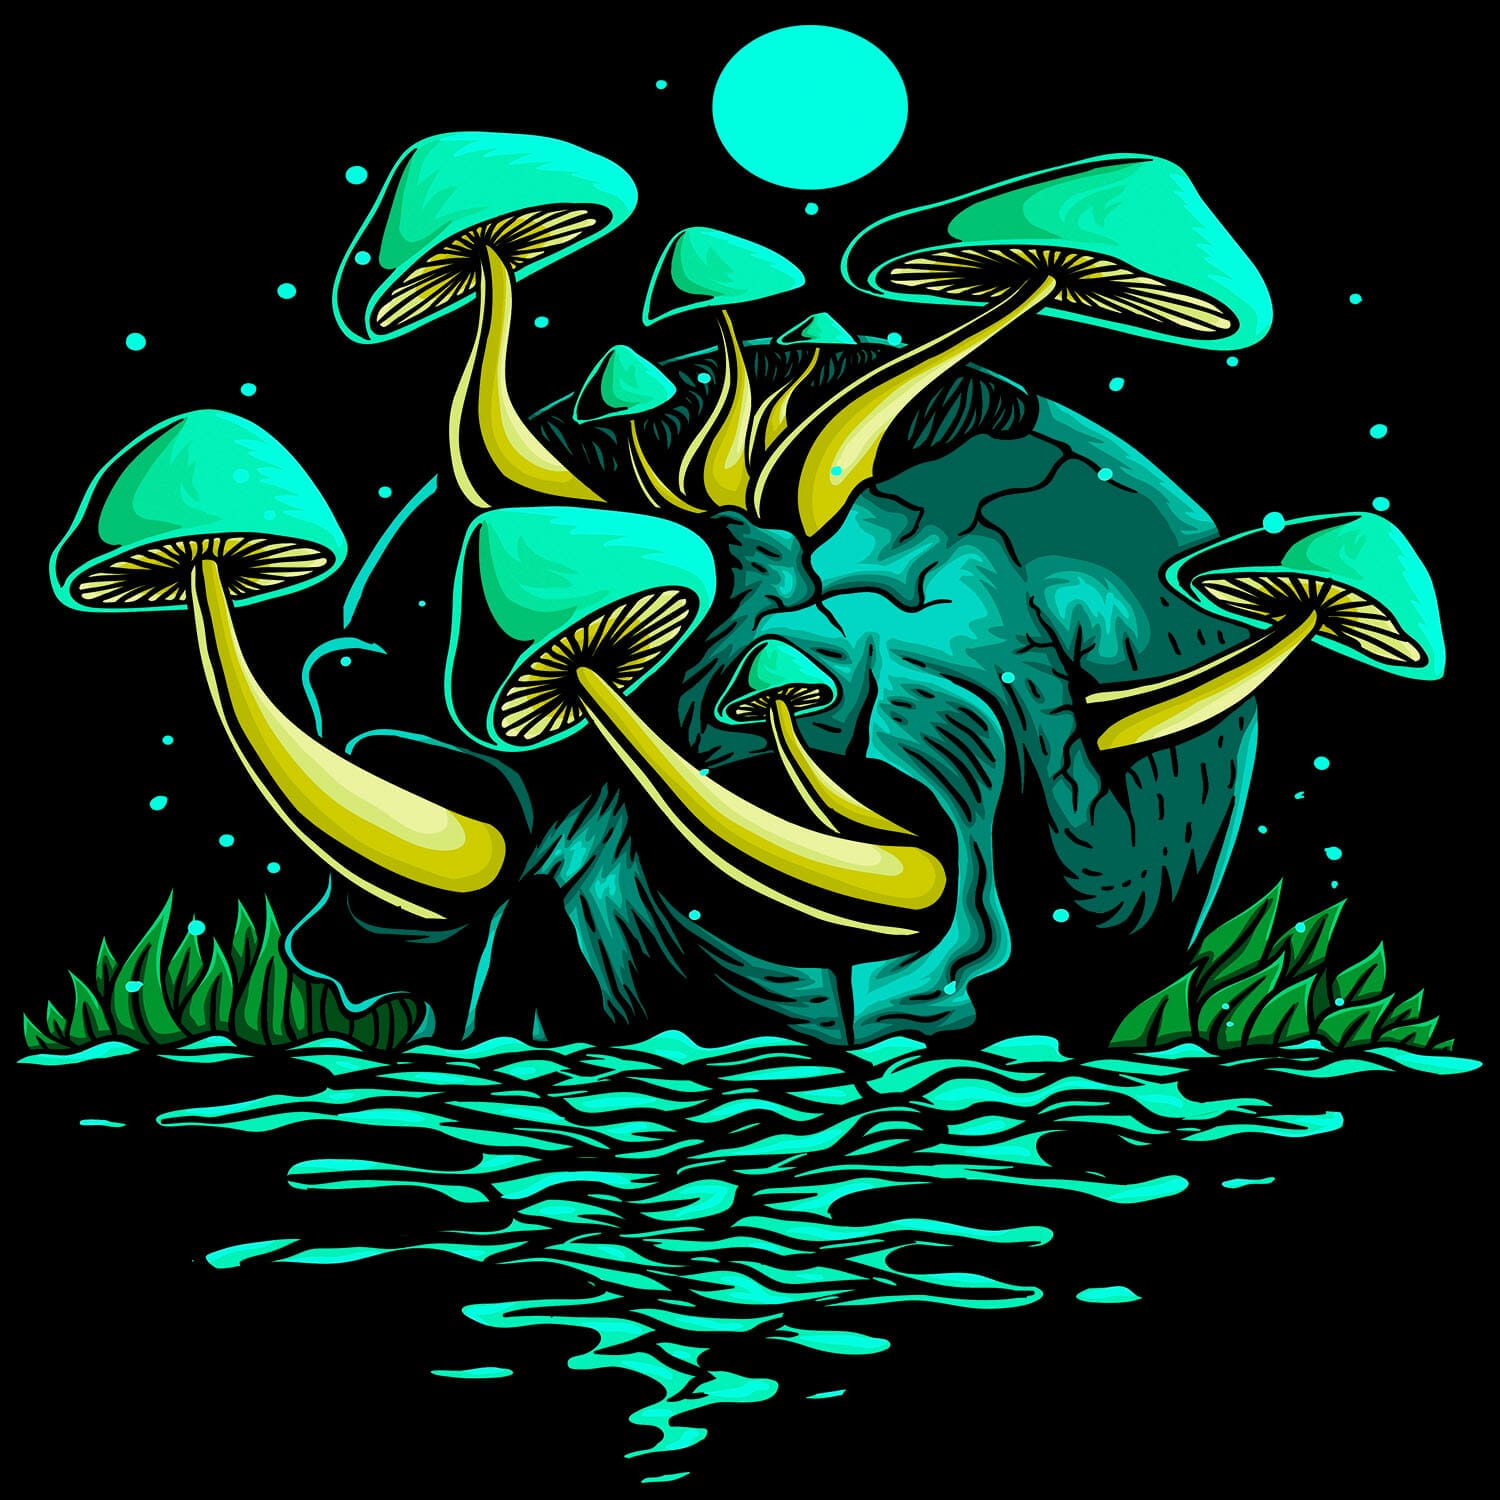 Mystical Mushrooms Growing Out Of A Skull TShirt Design.